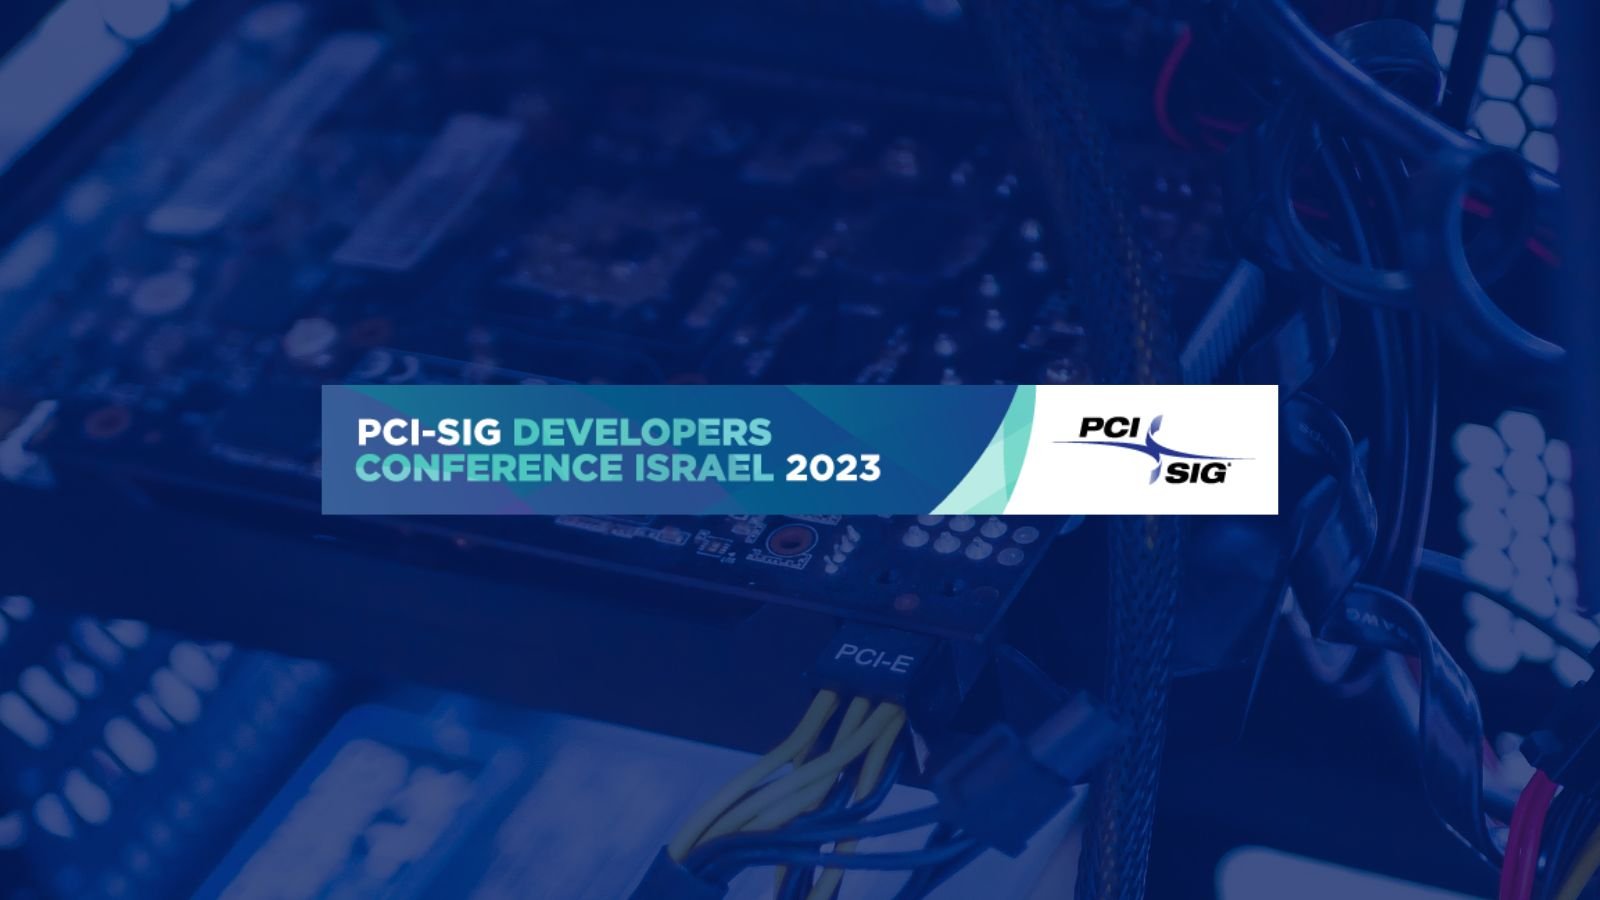 PCI-SIG DevCon Israel 2023 - event page